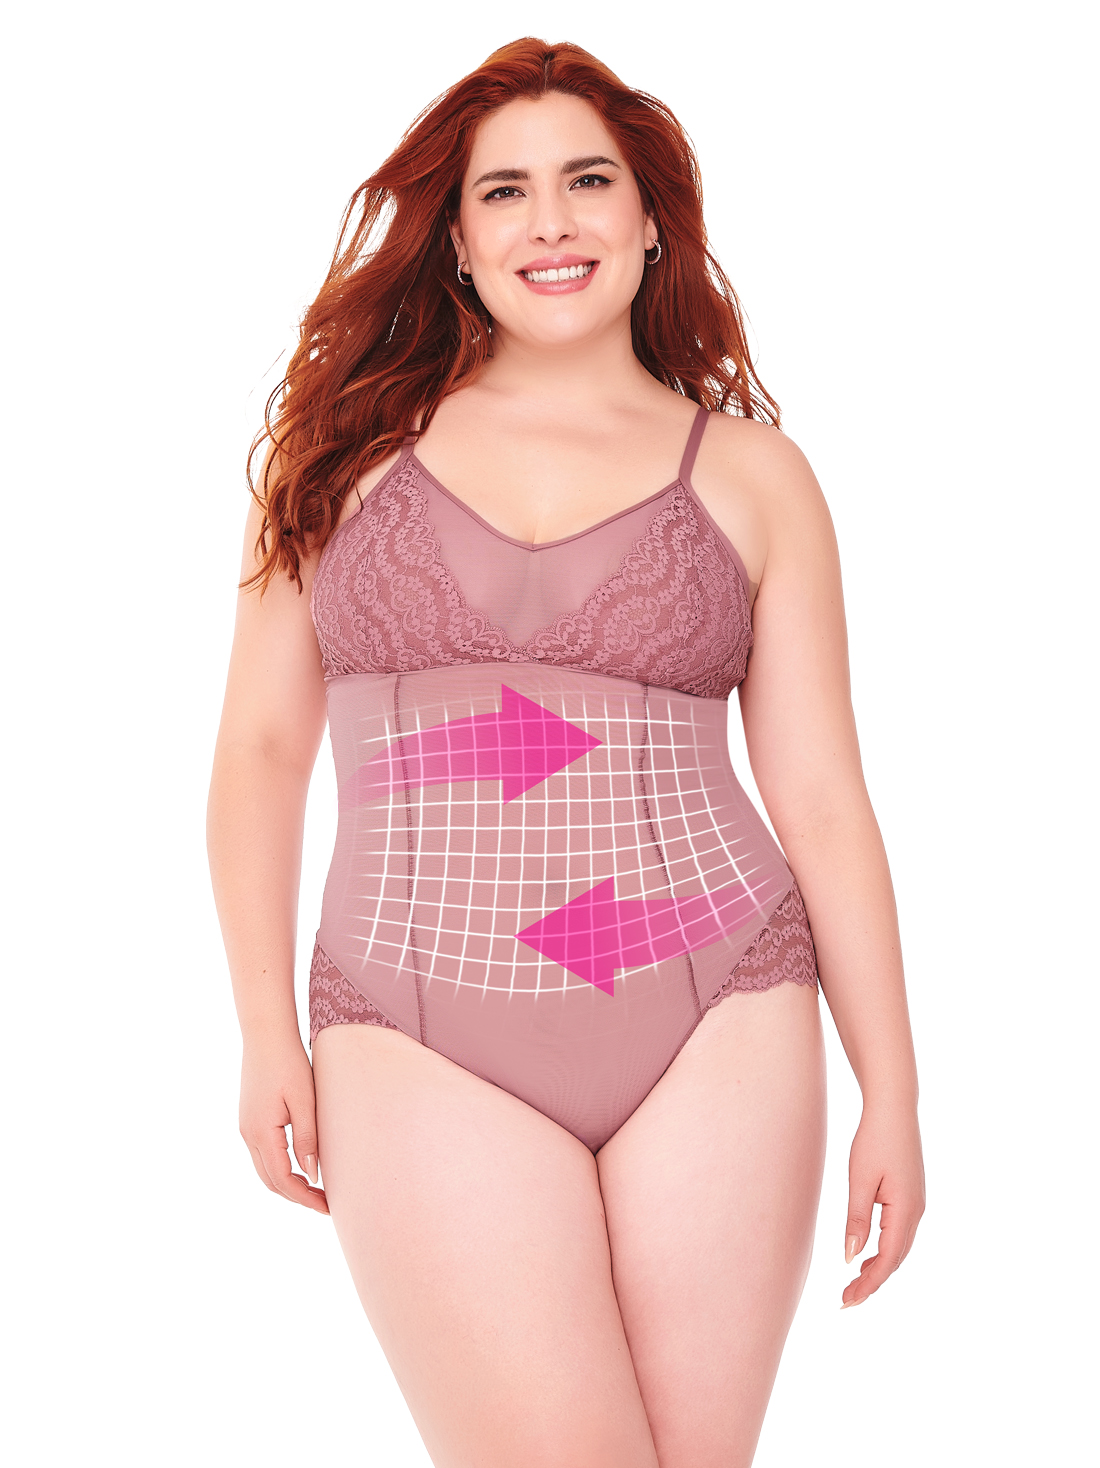 Body reductor firme 74000, ROSA III, hi-res